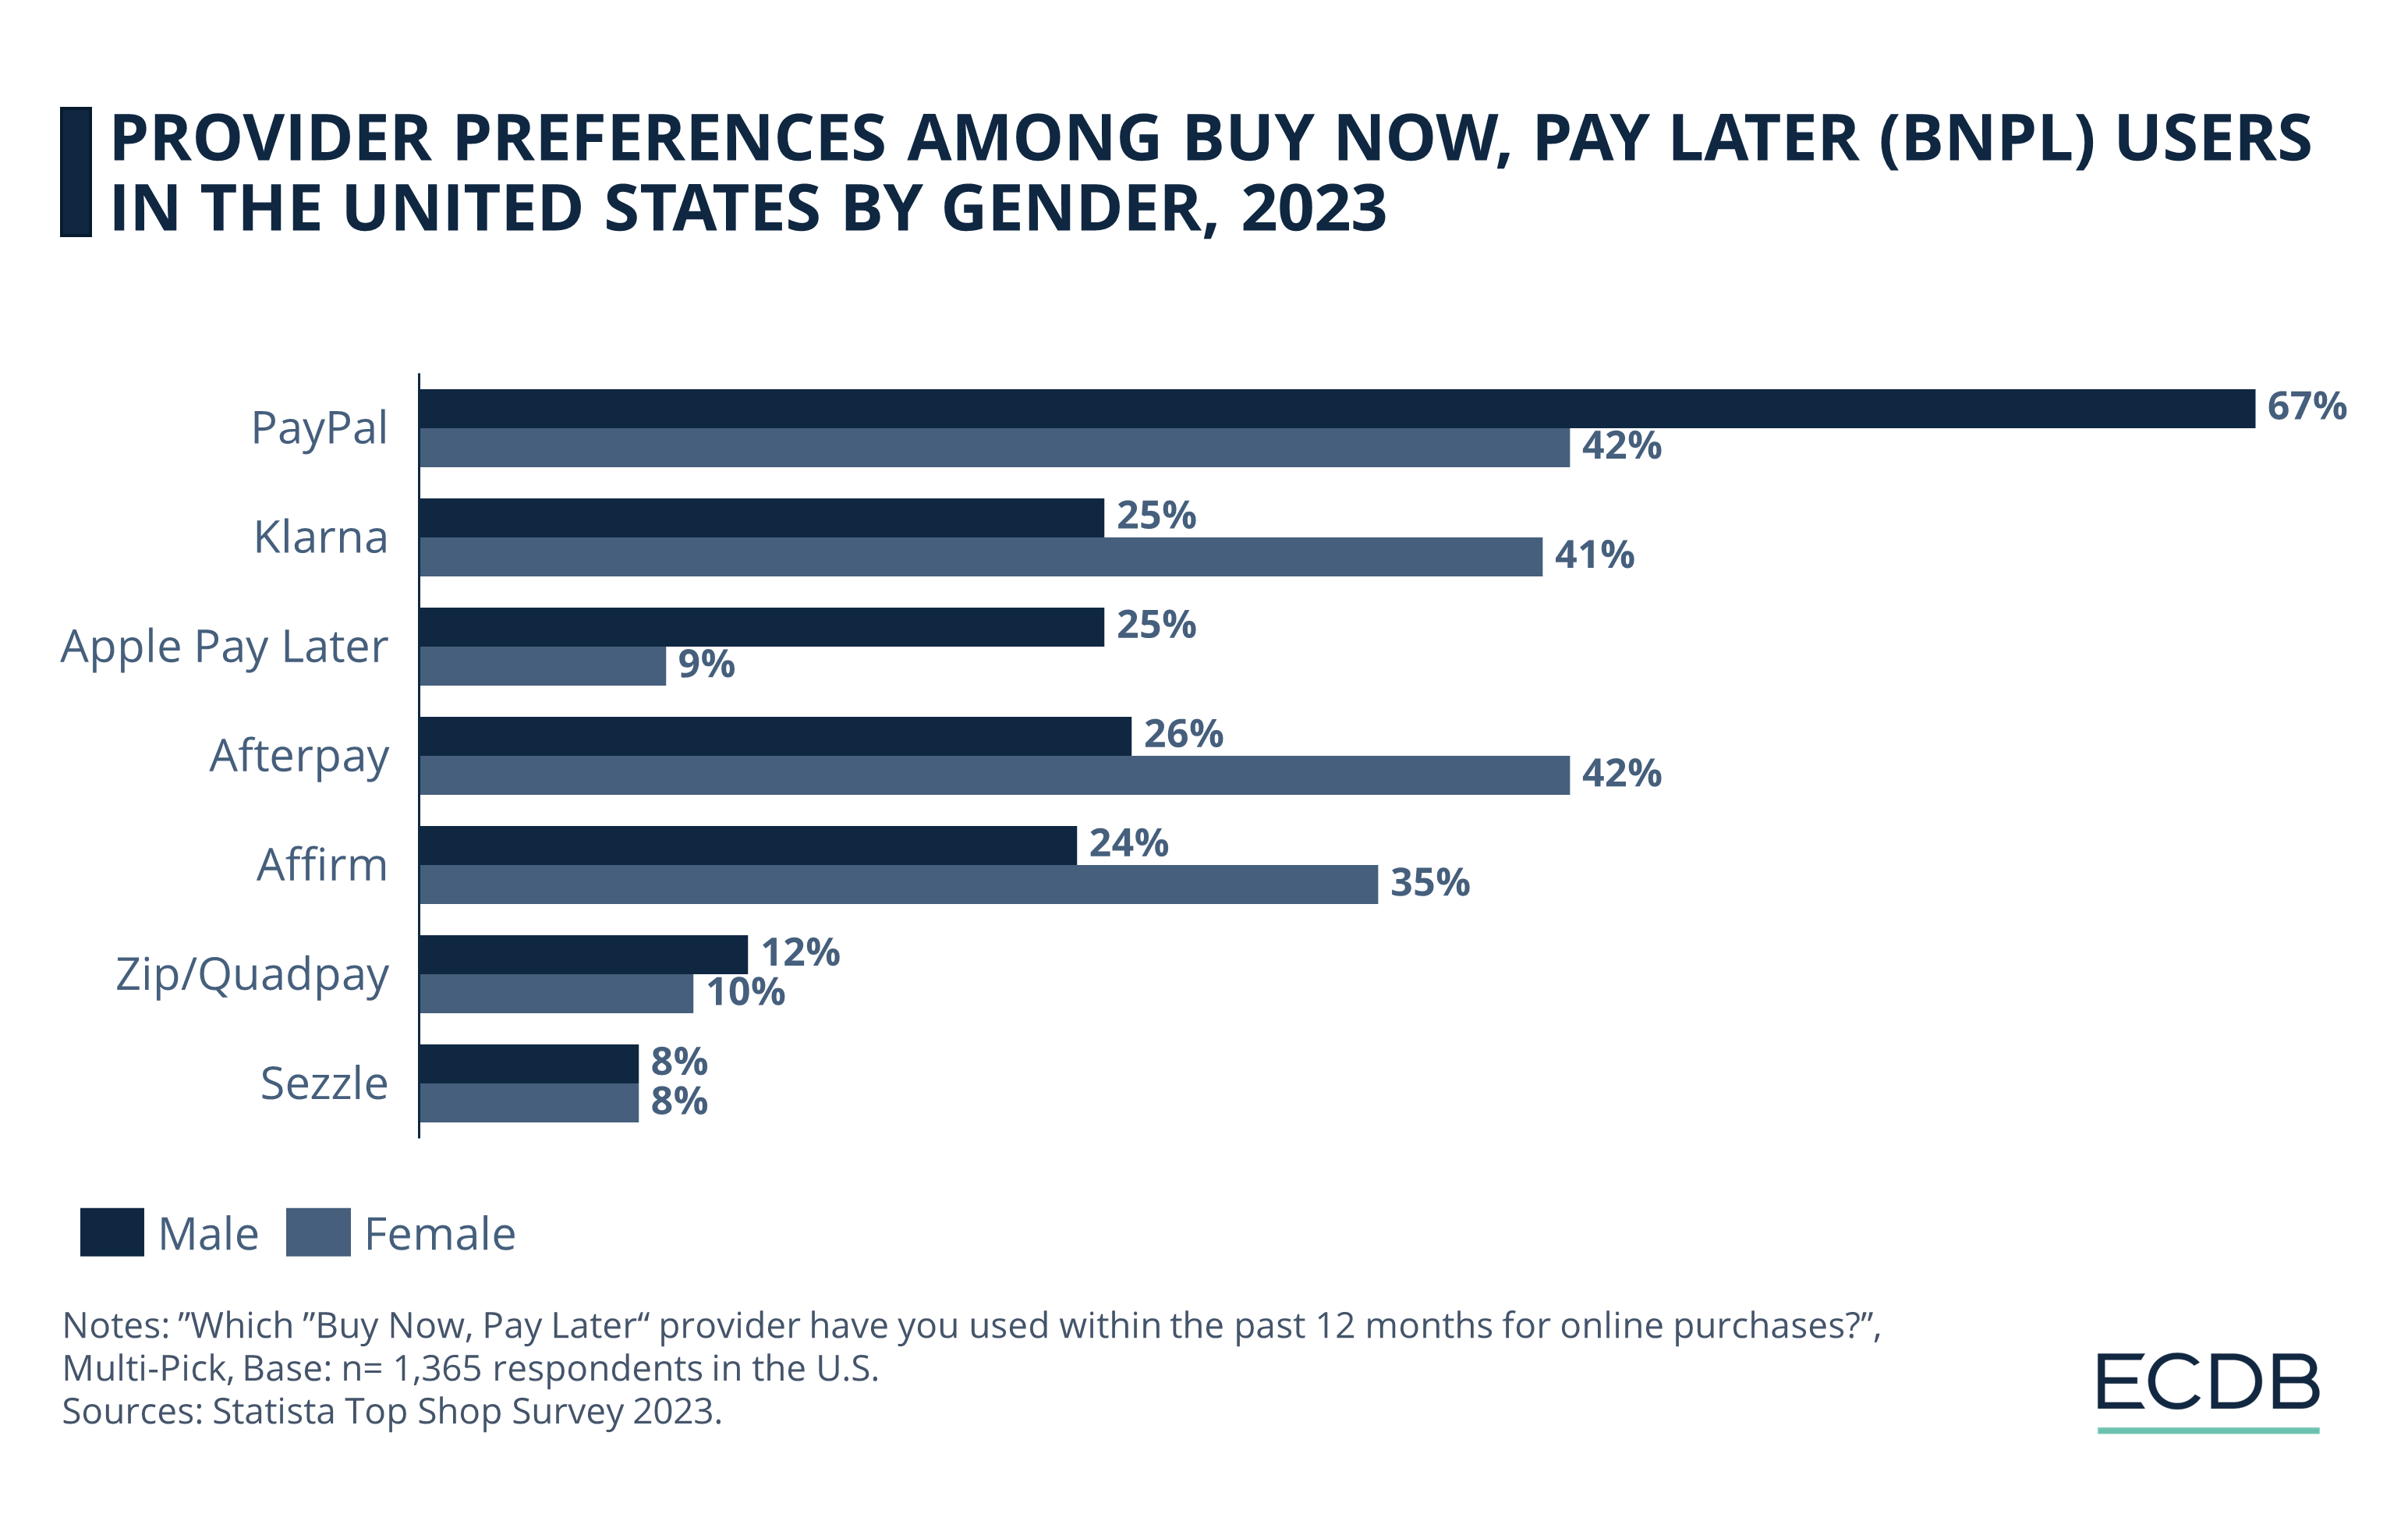 Provider Preferences Among Buy Now, Pay Later (BNPL) Users in the United States by Gender, 2023